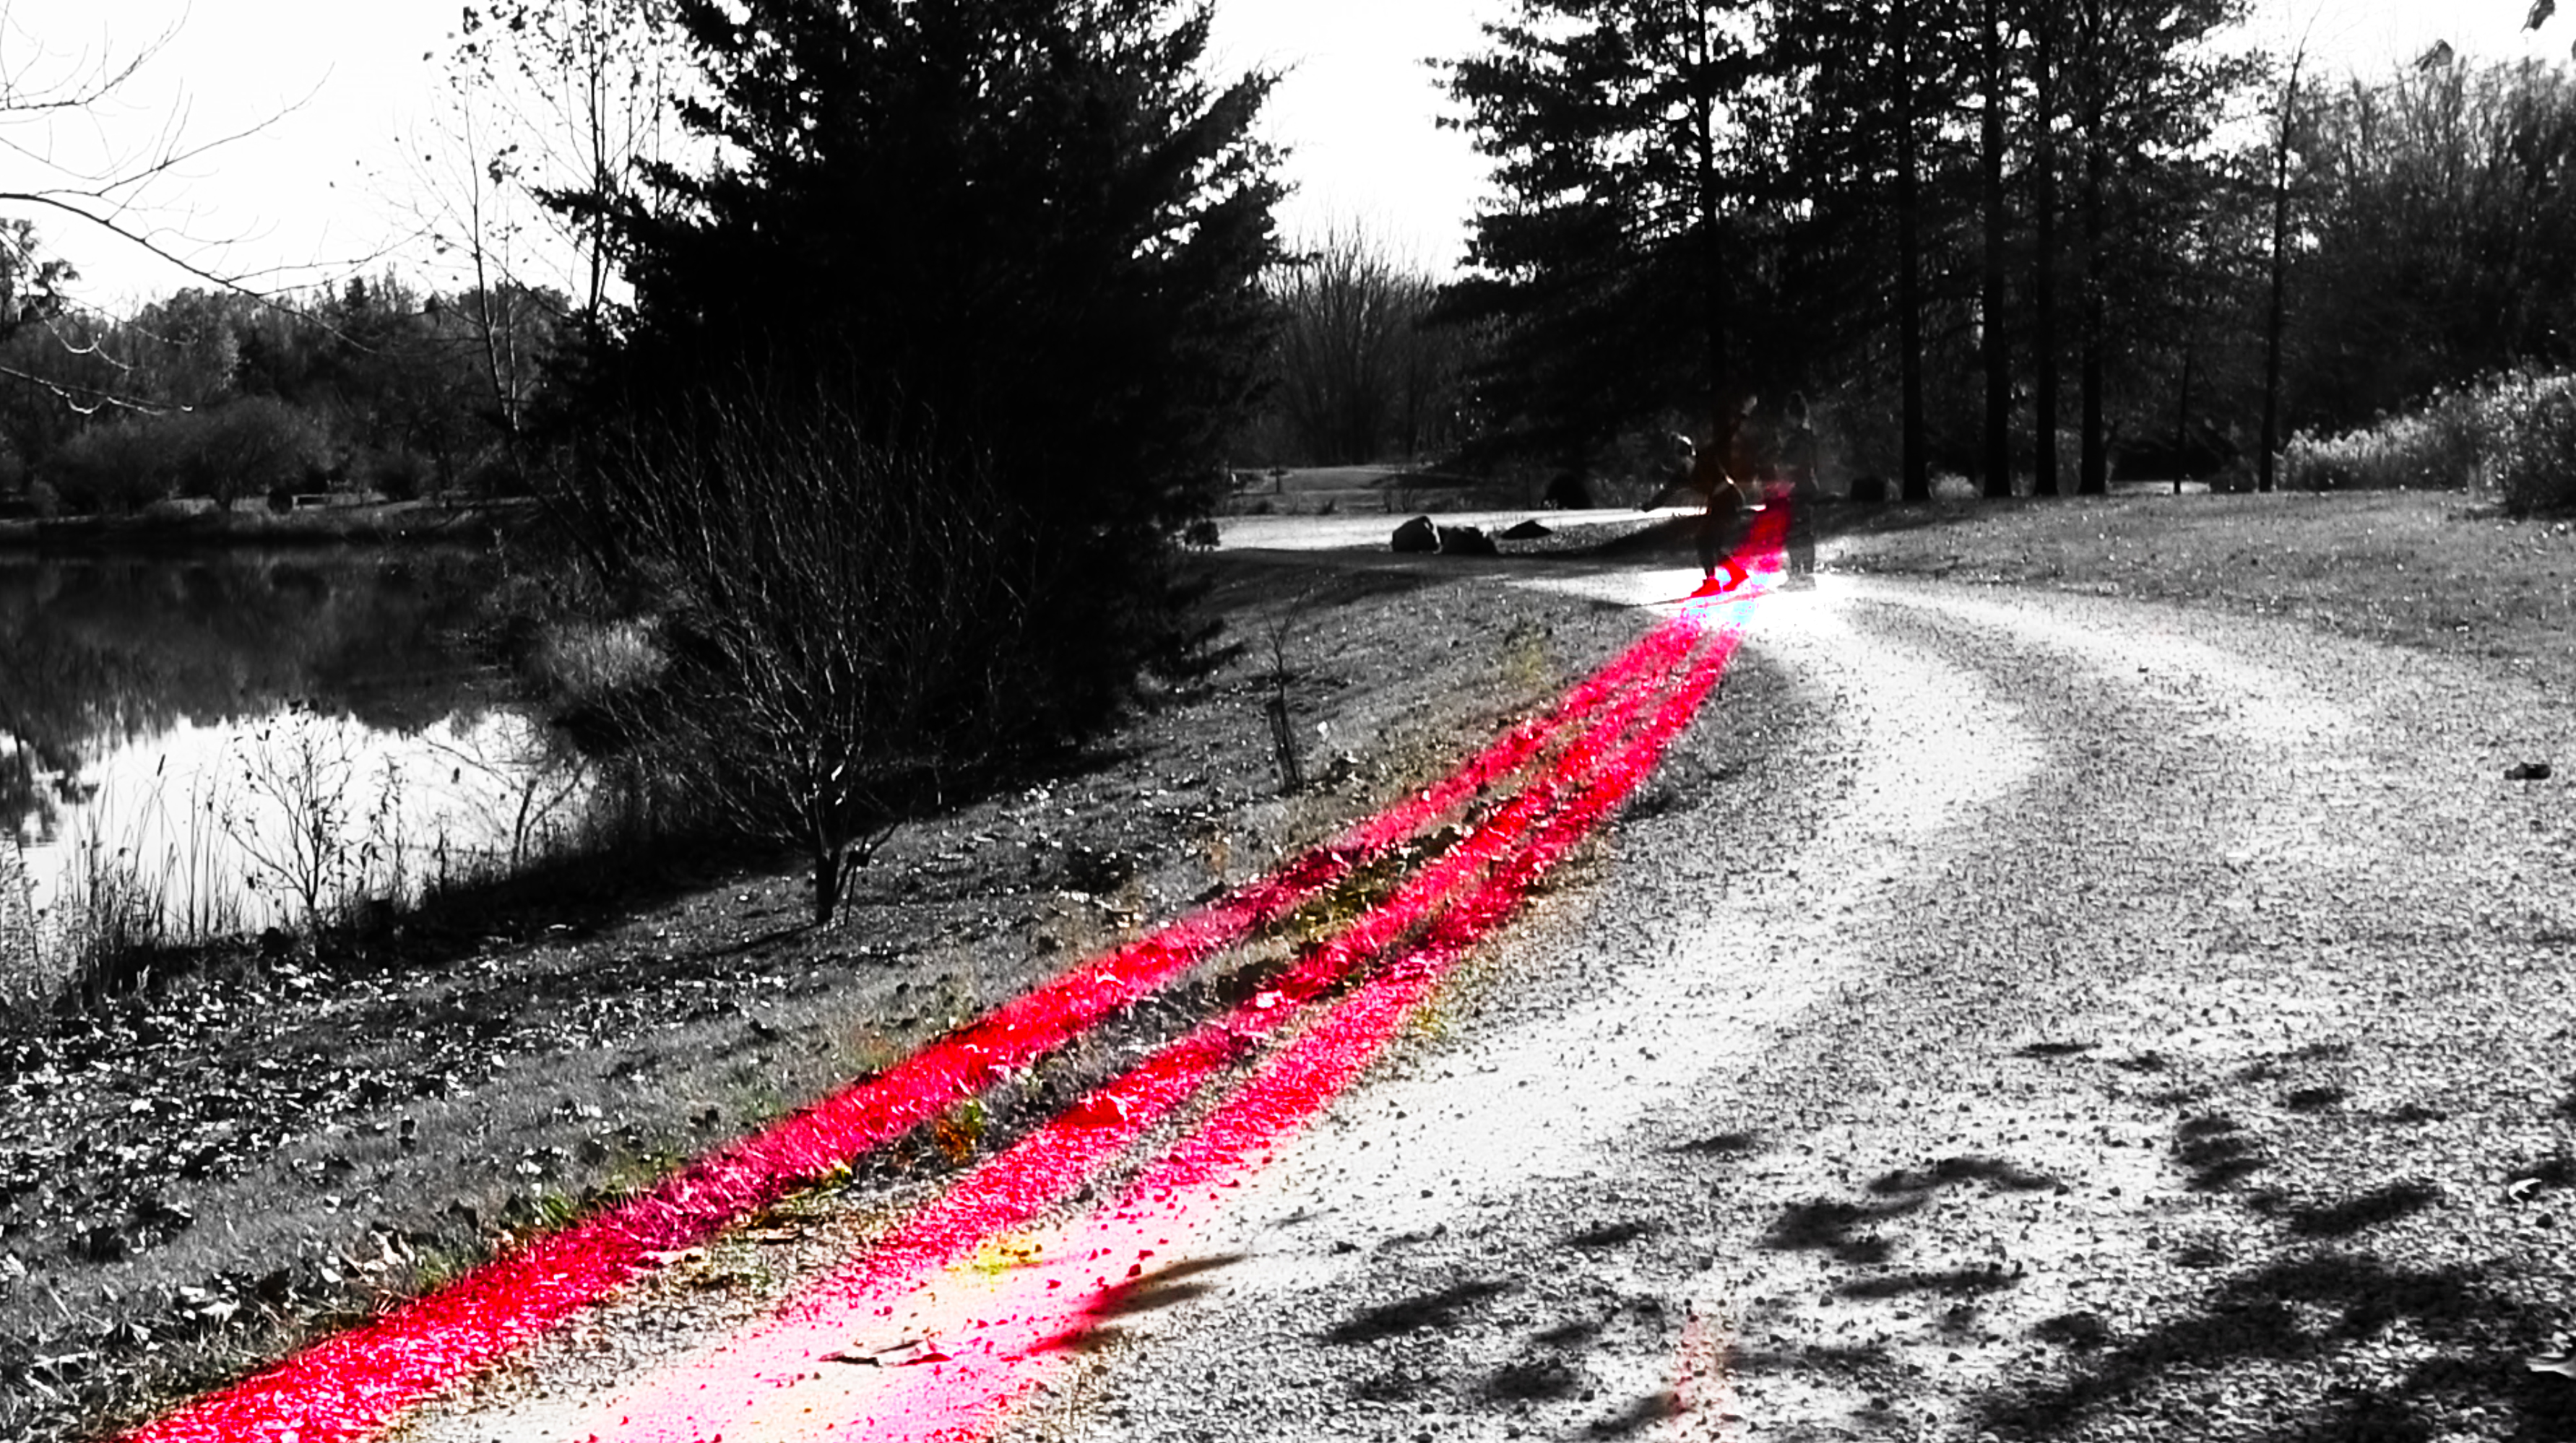 A black and white landscape photograph that shows a path curving around a bank of grass and pine trees. Three pinkish-red lines extend diagonally across the image from the bottom left corner, to a figure far off down that path.